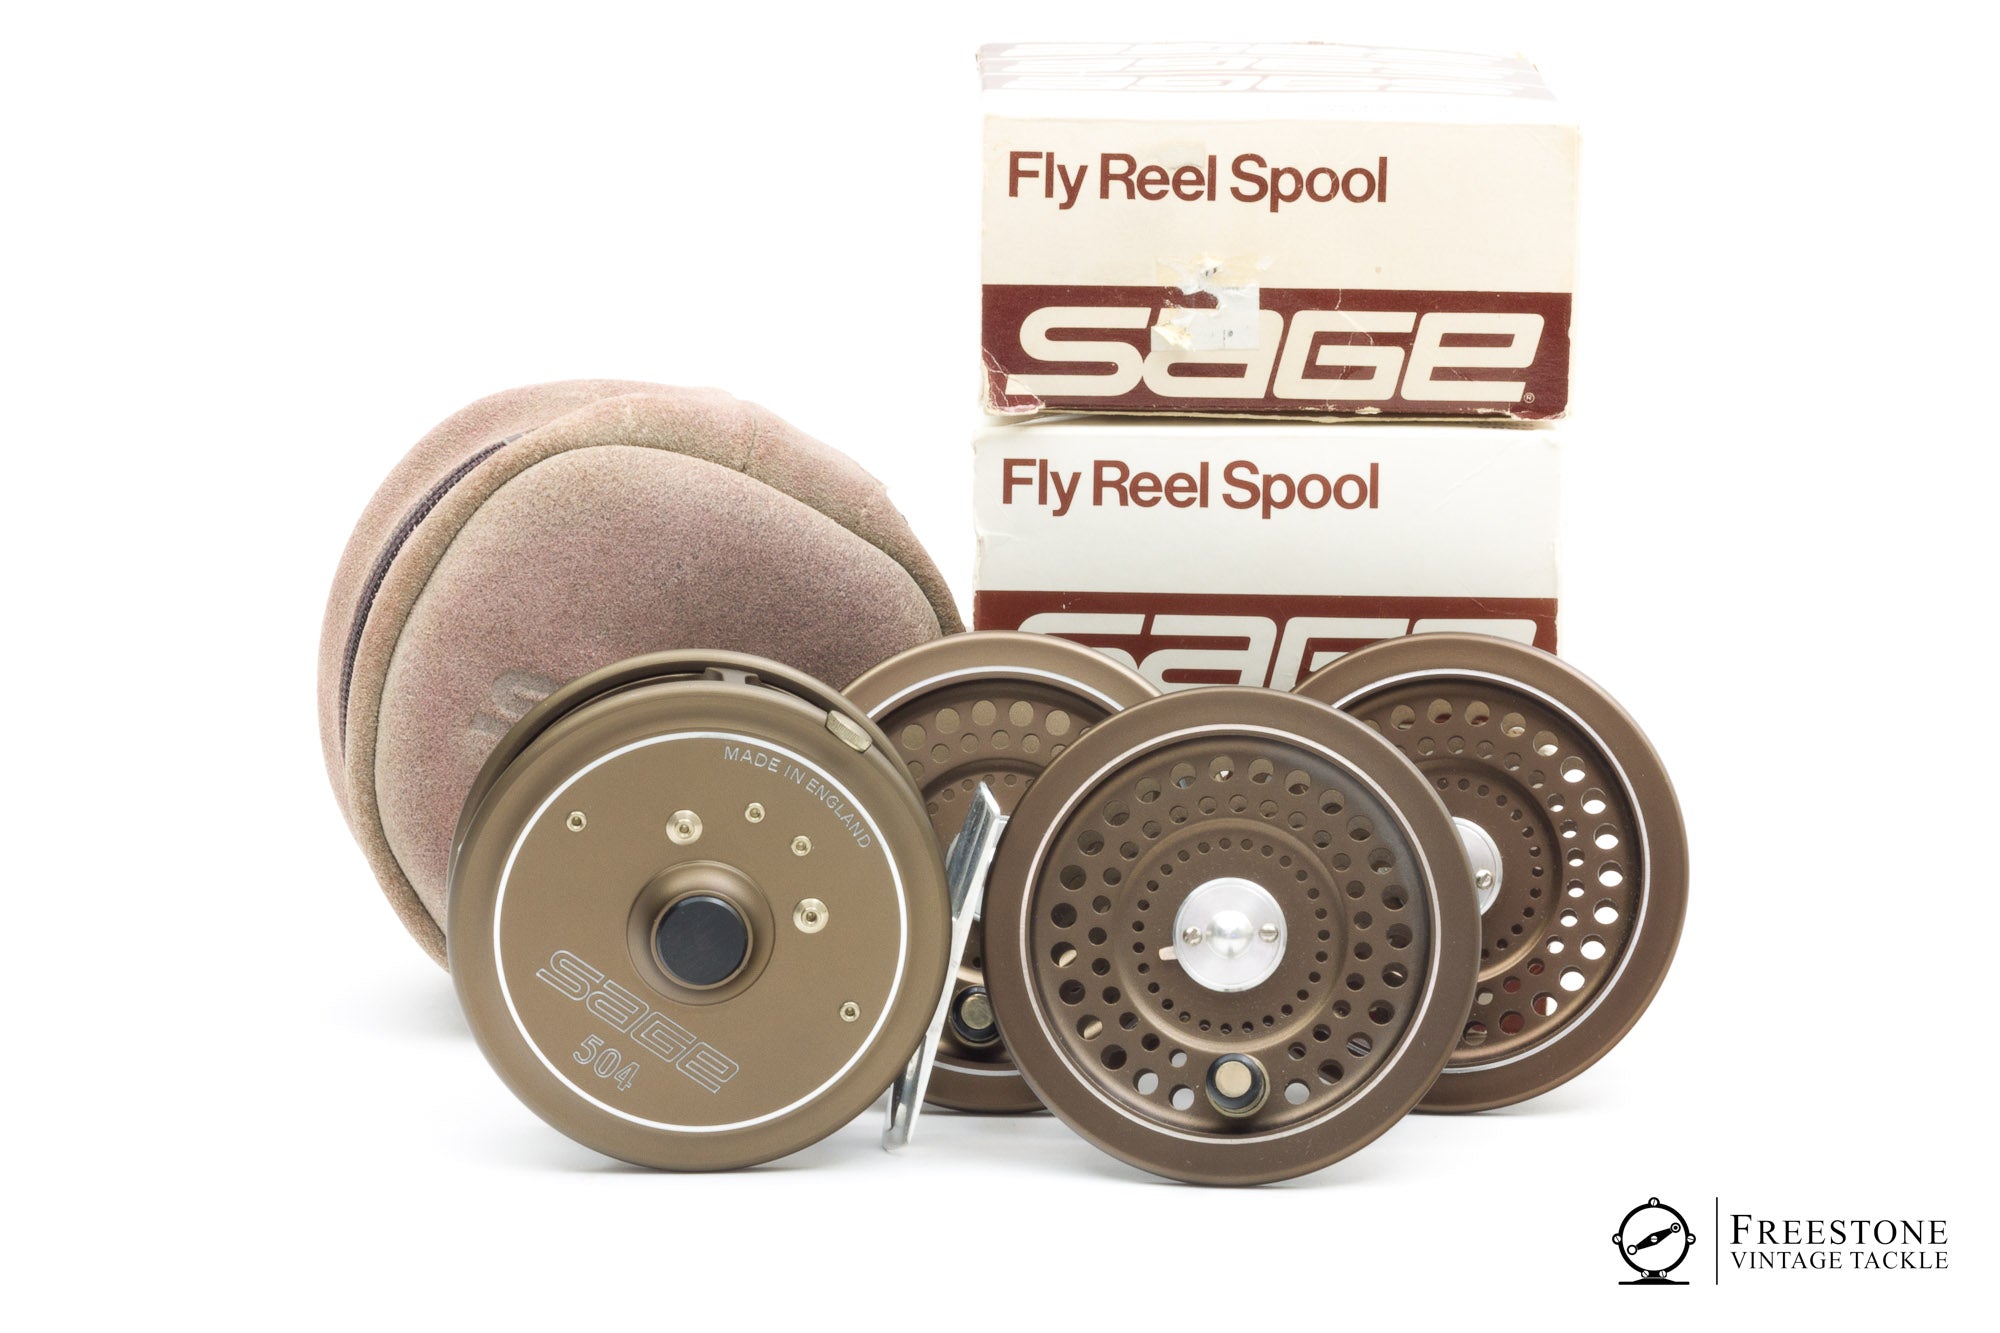 Hardy-Built Sage 509 Fly Fishing Reel. Made in England. W/ Case.